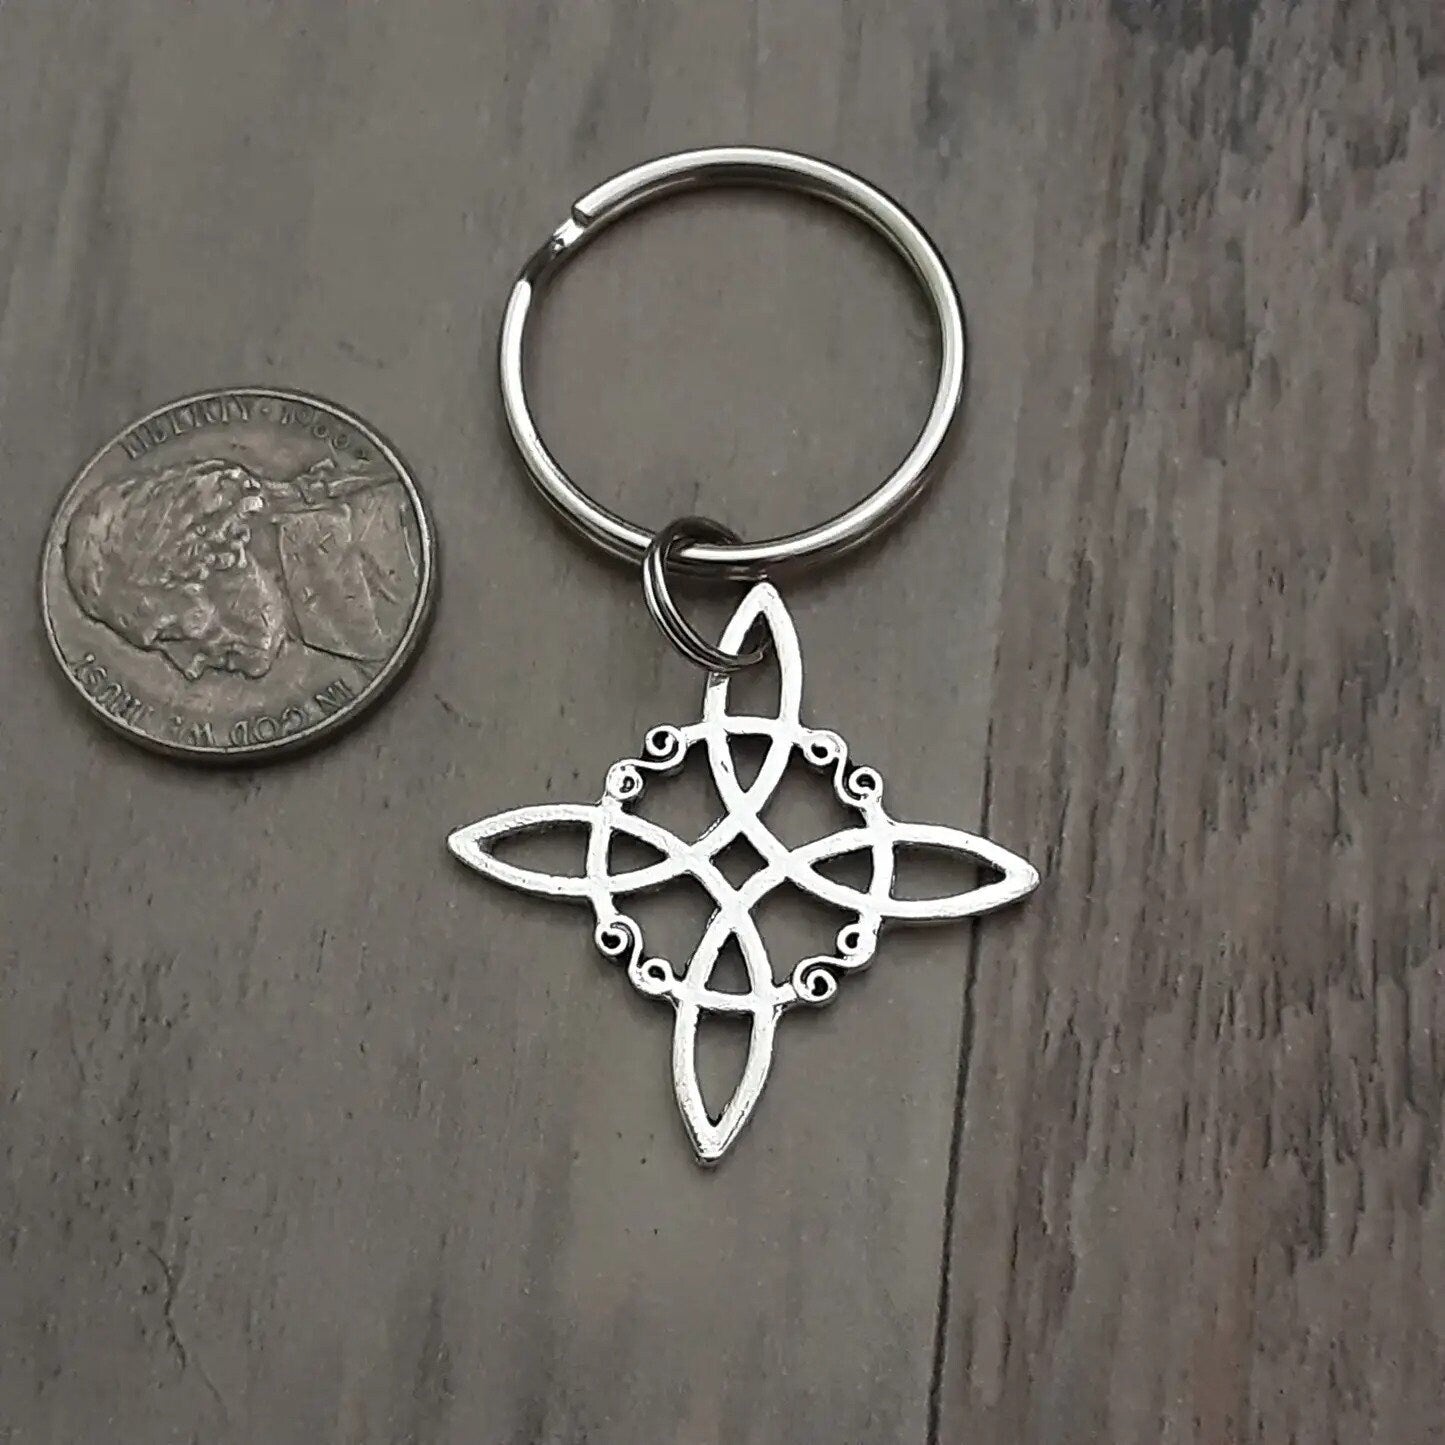 Witches Knot Protection Amulet Keychain Silver Pagan Witch Accessory Witchcraft Gift